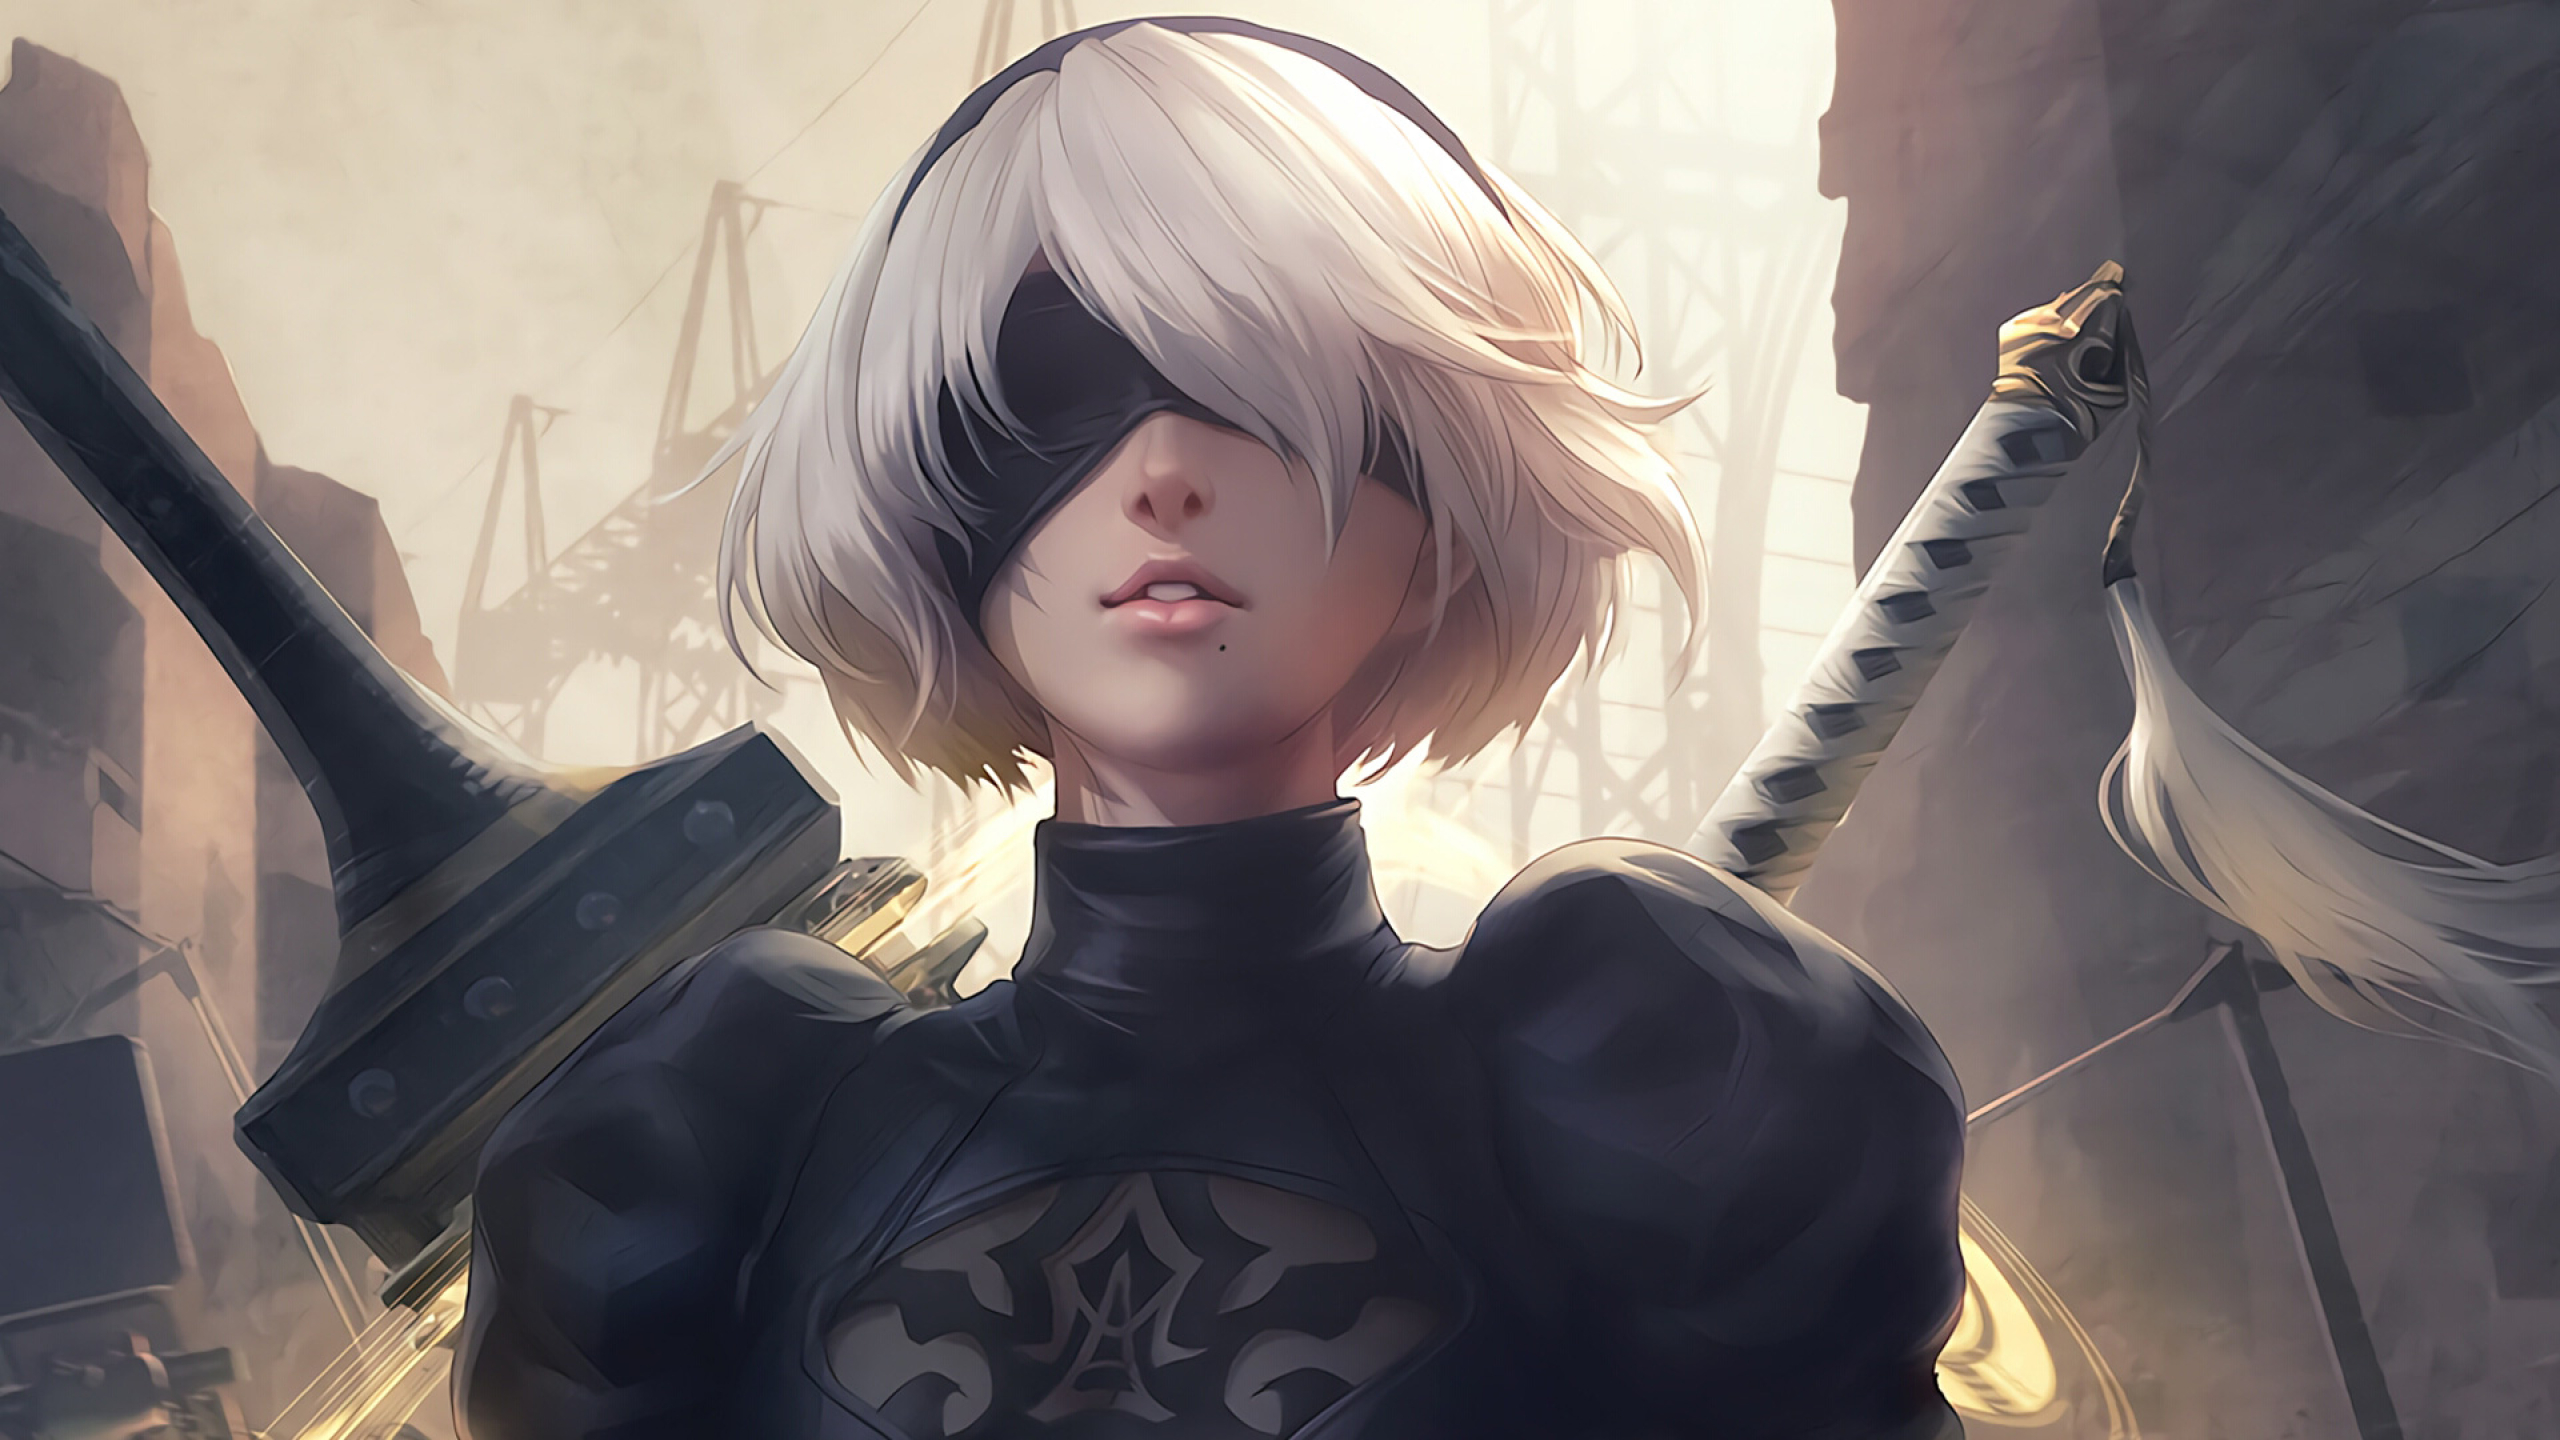 2560x1440 2b Nier Automata 1440p Resolution Wallpaper Hd Anime 4k Wallpapers Images Photos And Background